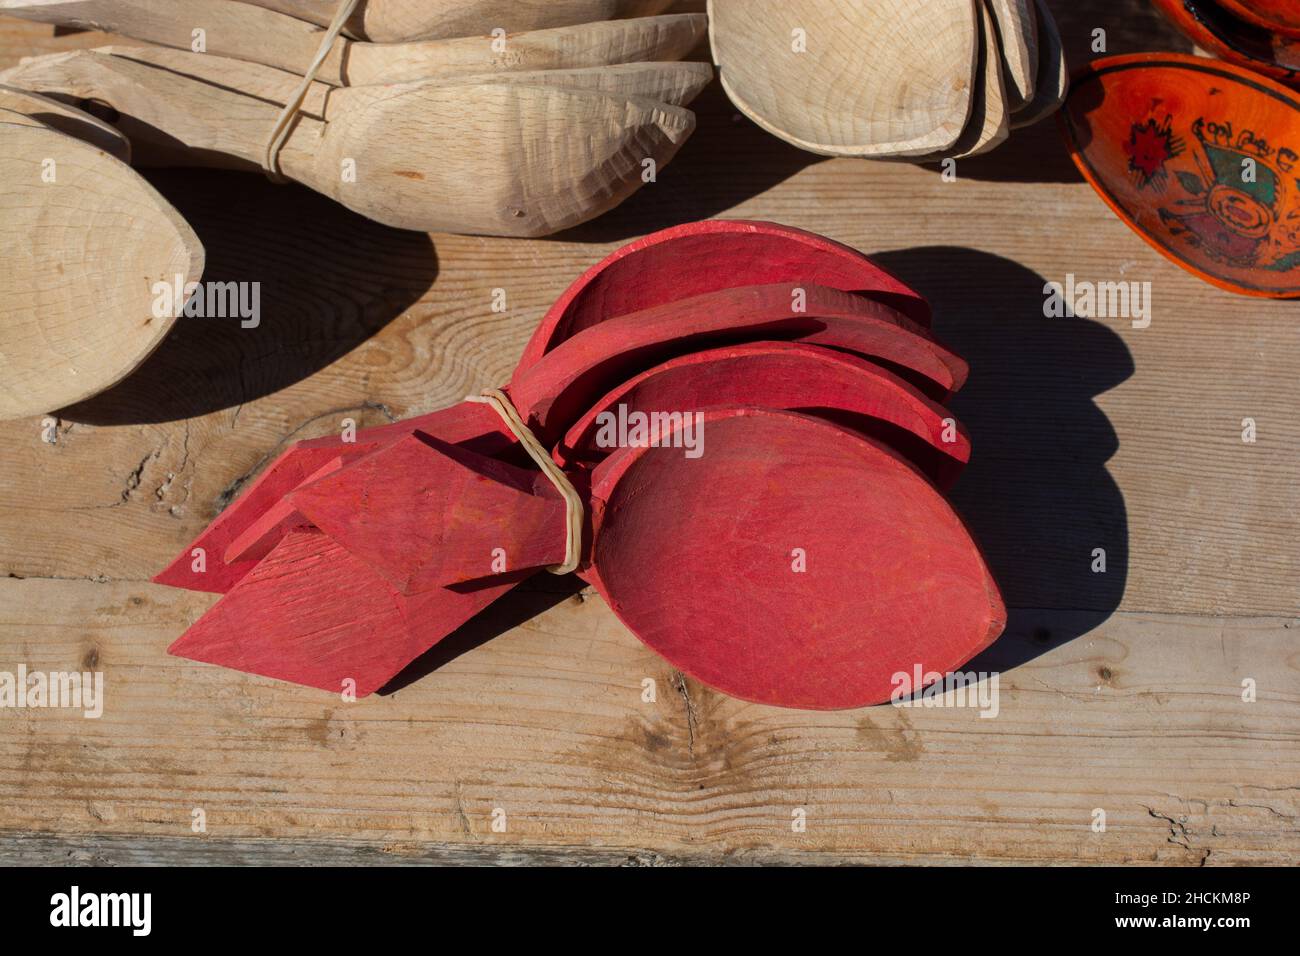 Top view of a tiled group of red wooden ancient spoon on a wooden bacjgroun Stock Photo